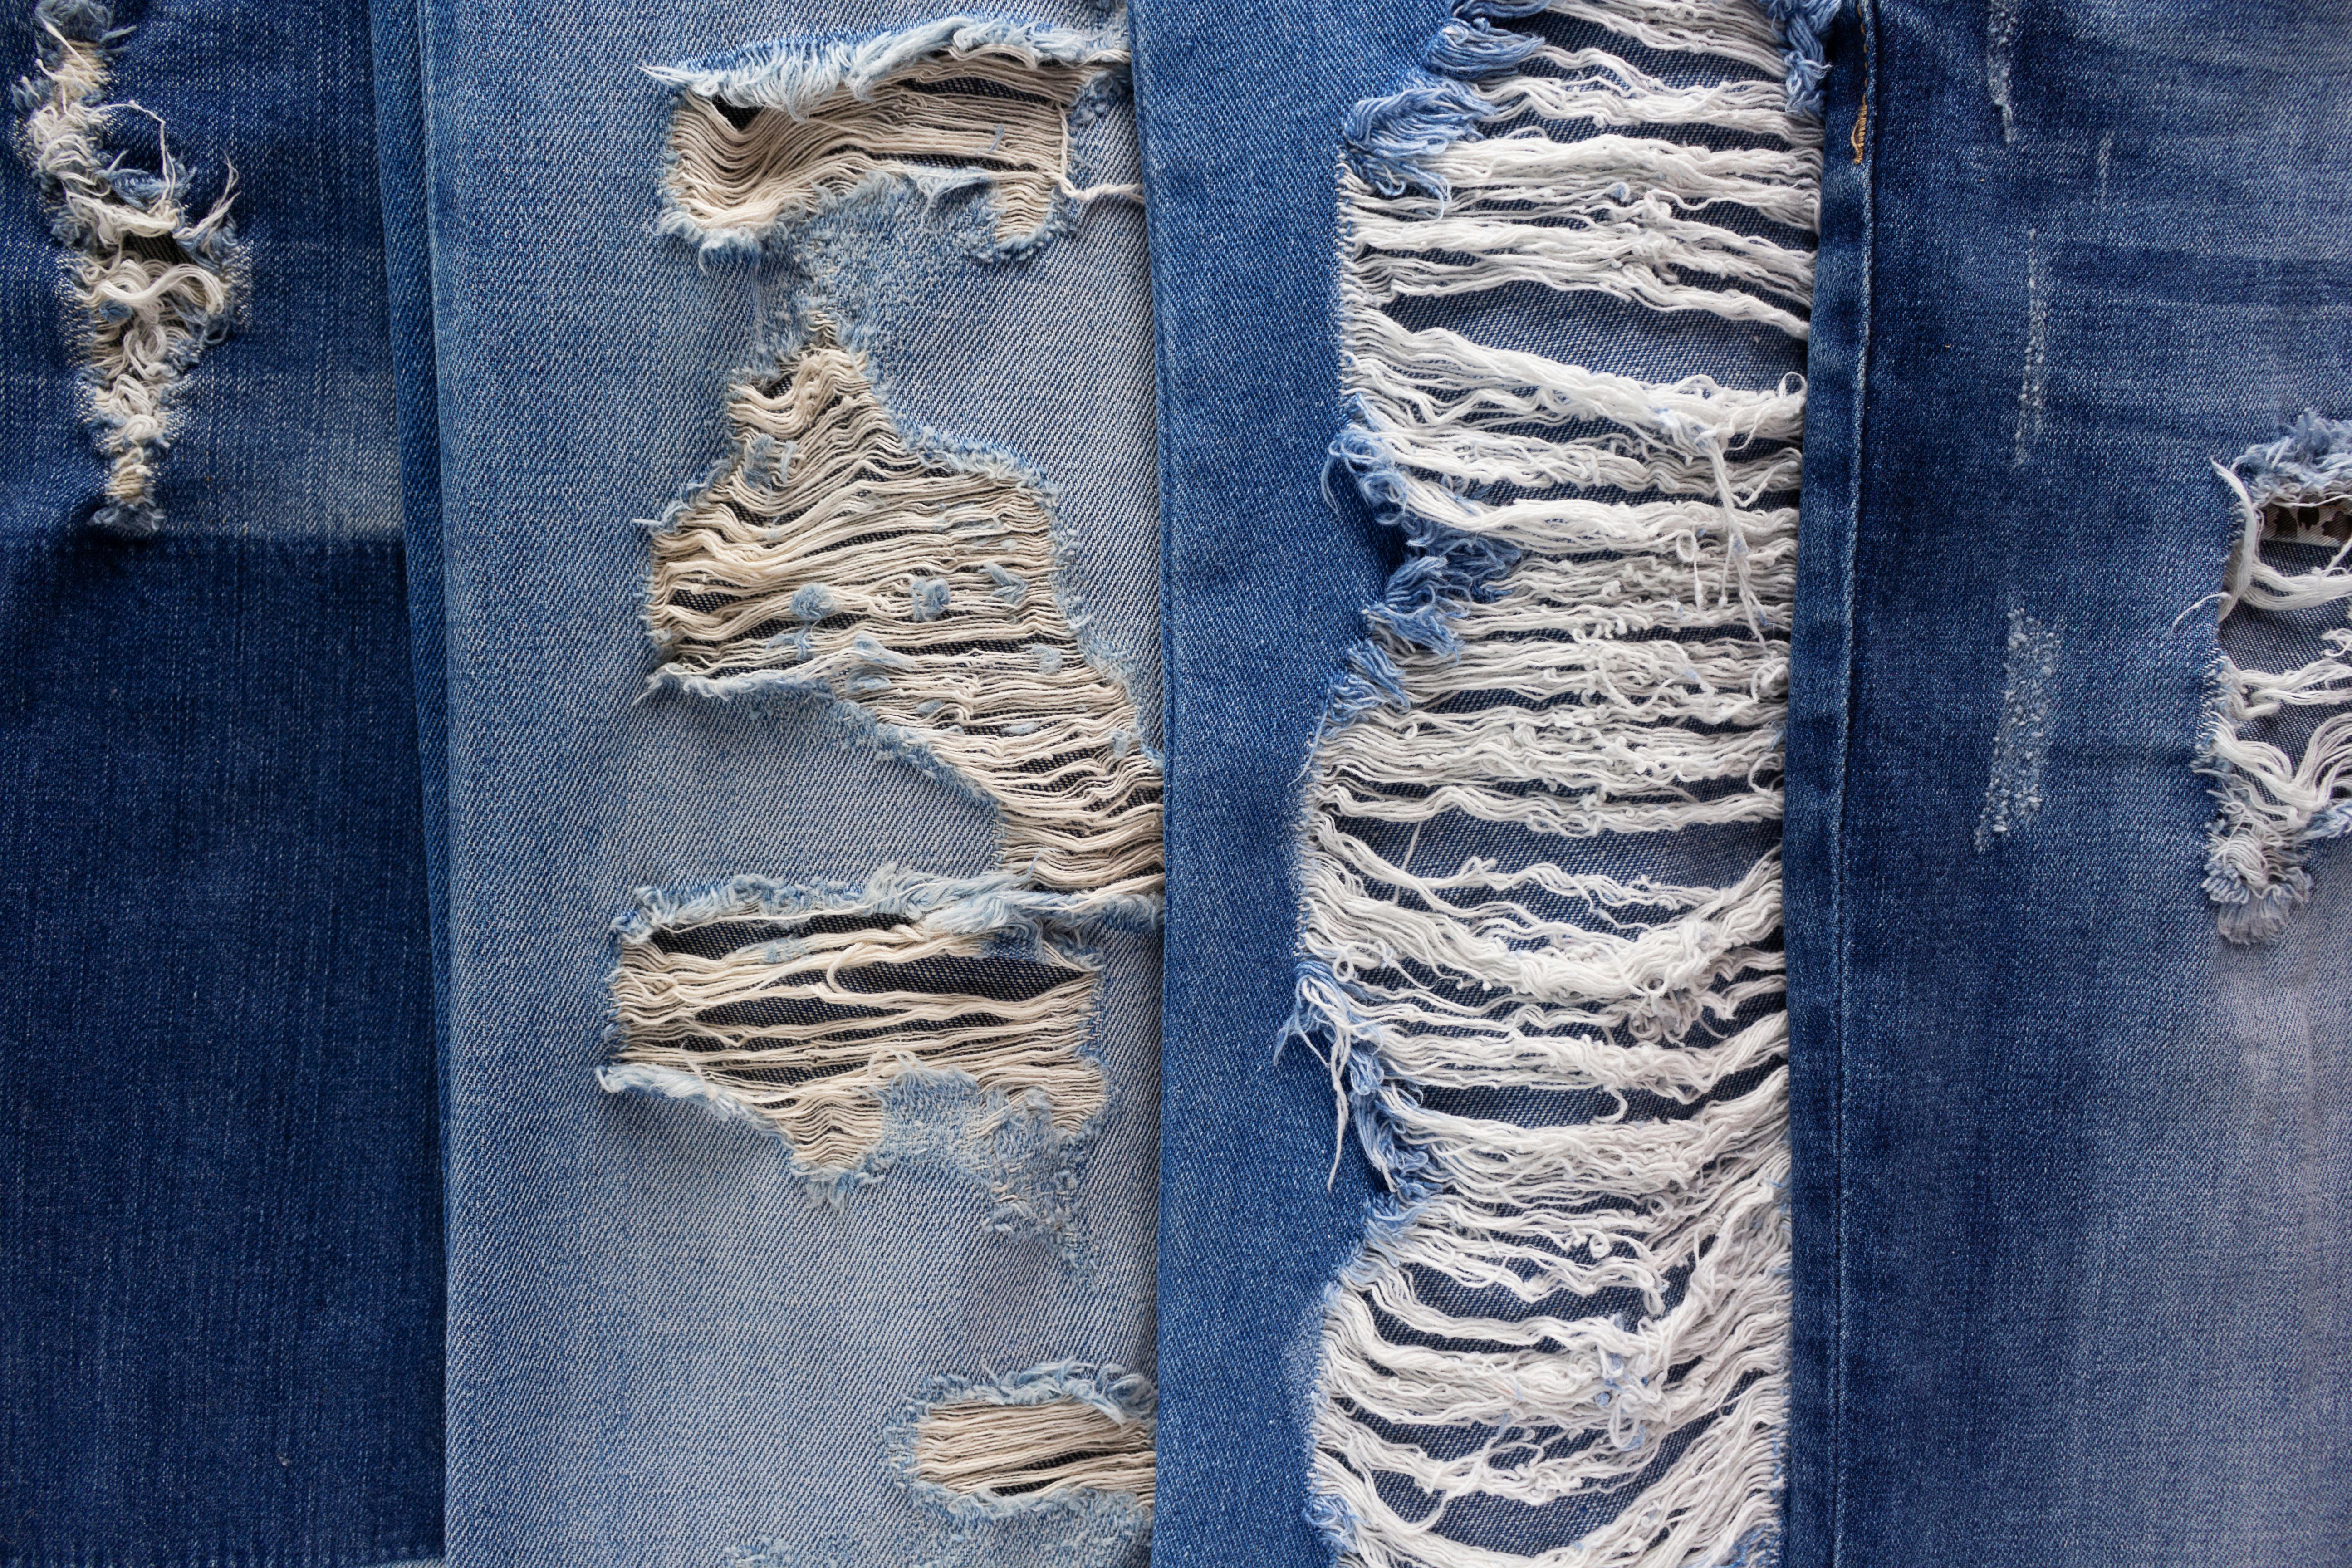  four different types of ripped denim jeans 